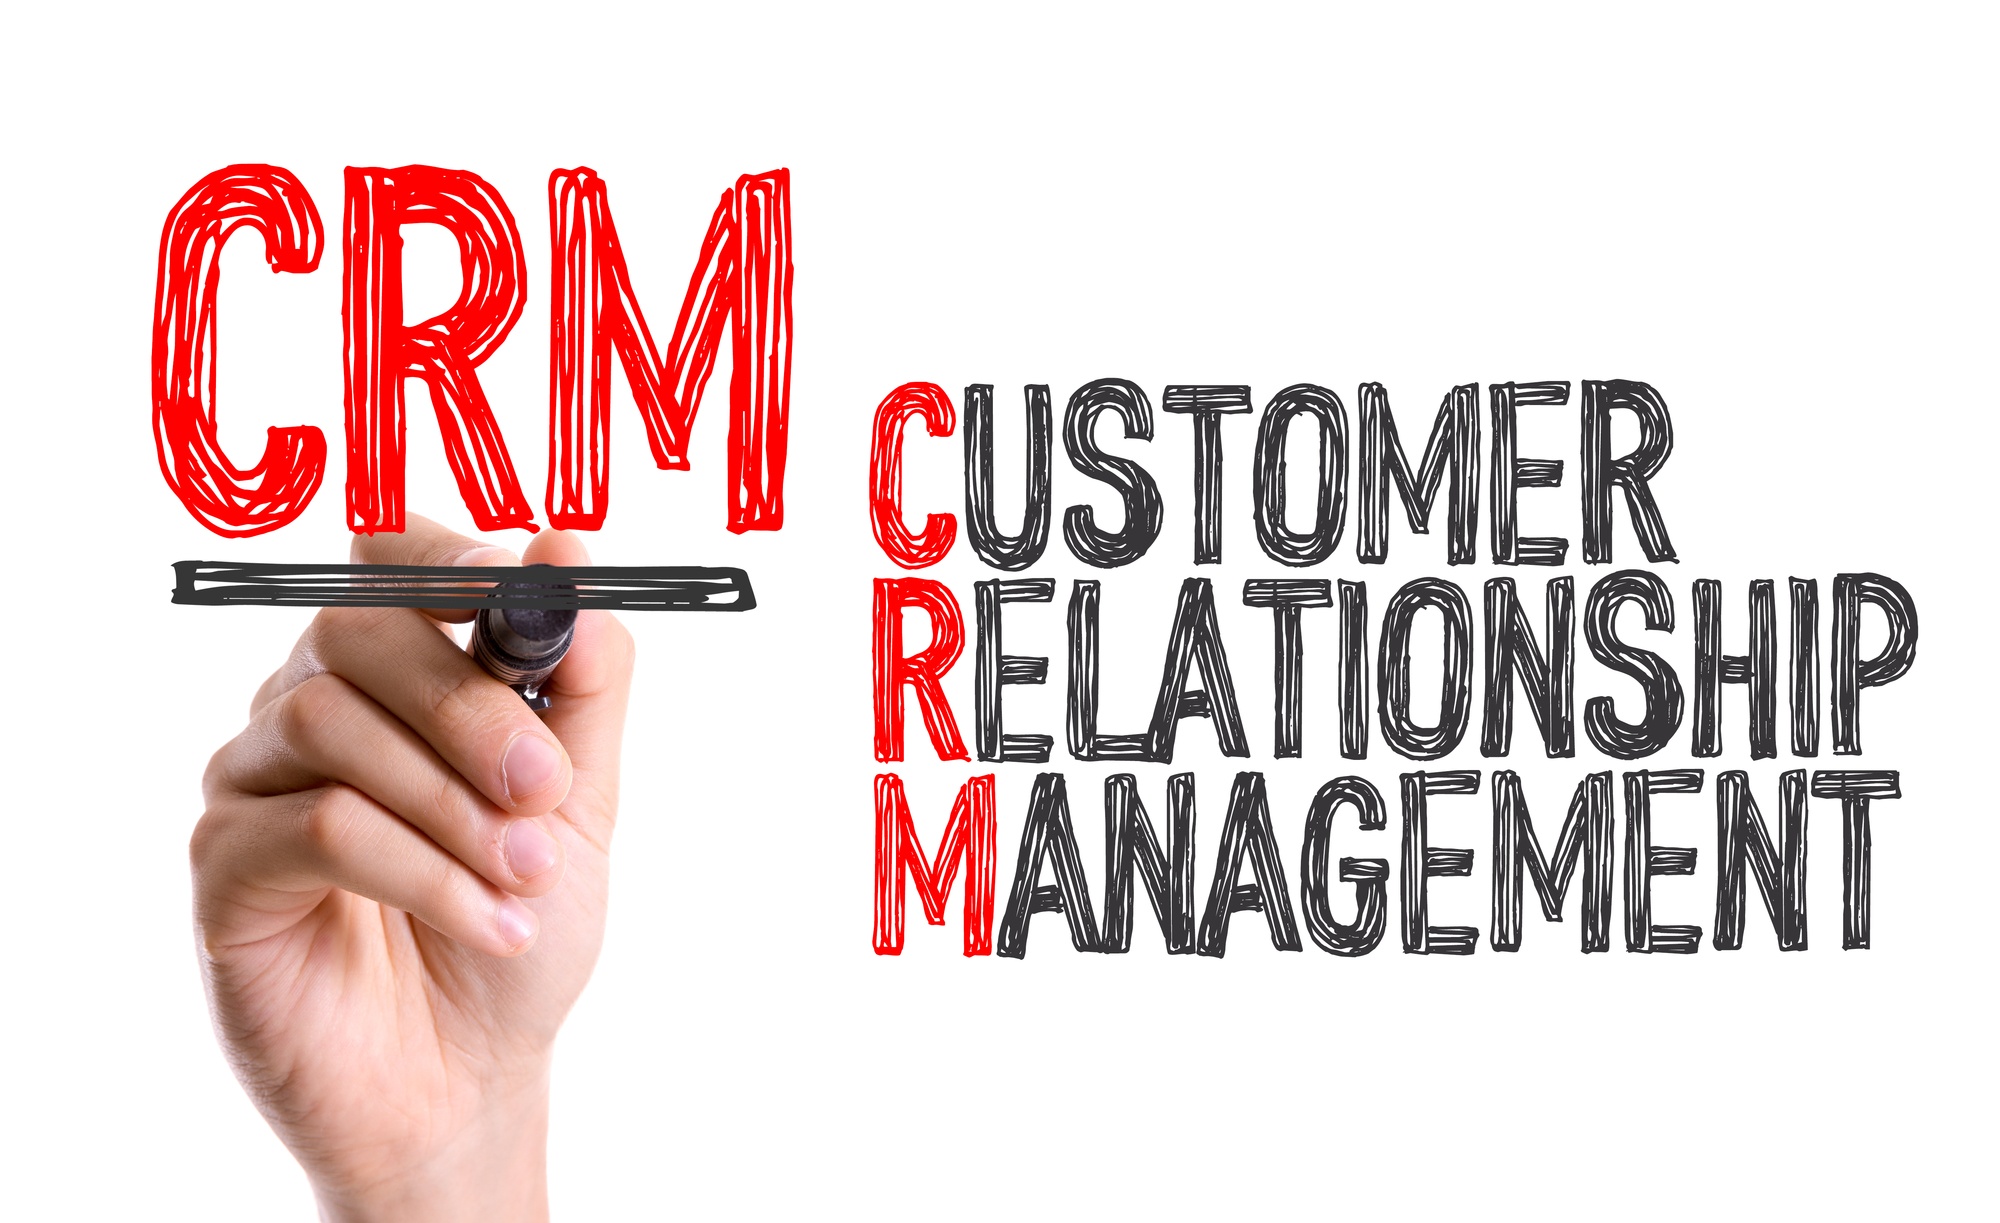 7 Questions You Should Be Asking As You Consider a CRM System